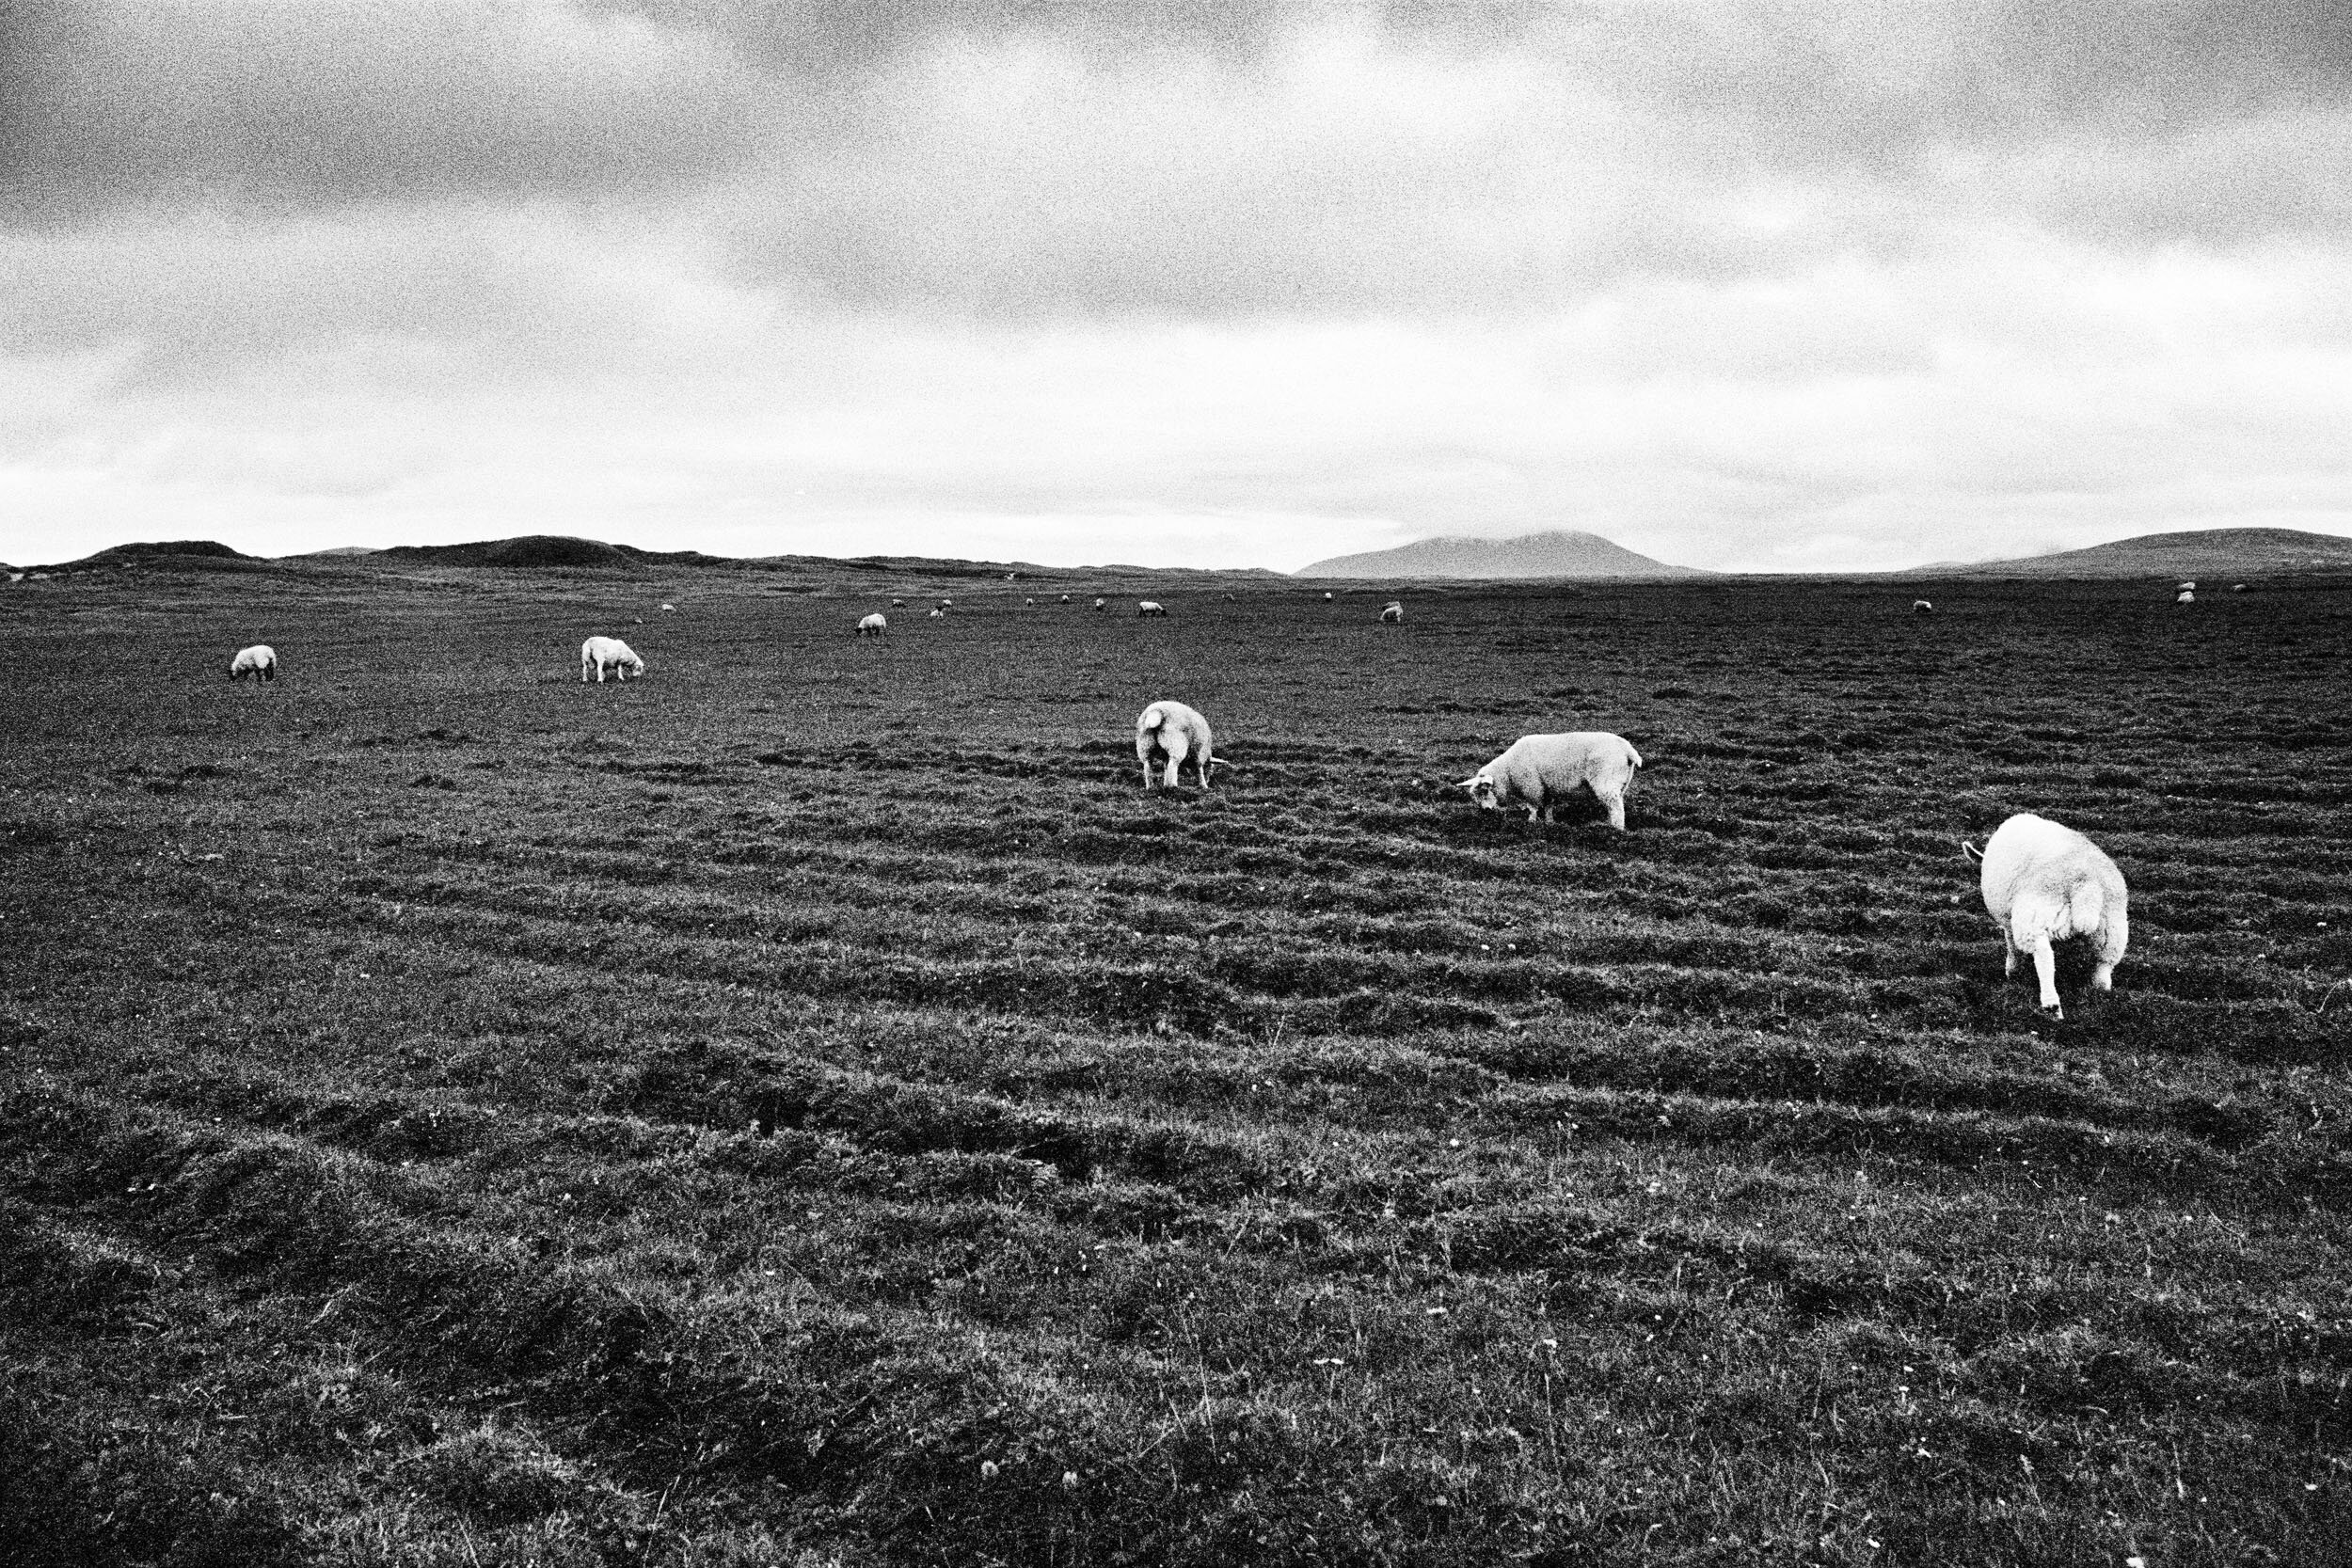  The Sheep Behind the Dunes, Isle of Berneray, 2019 